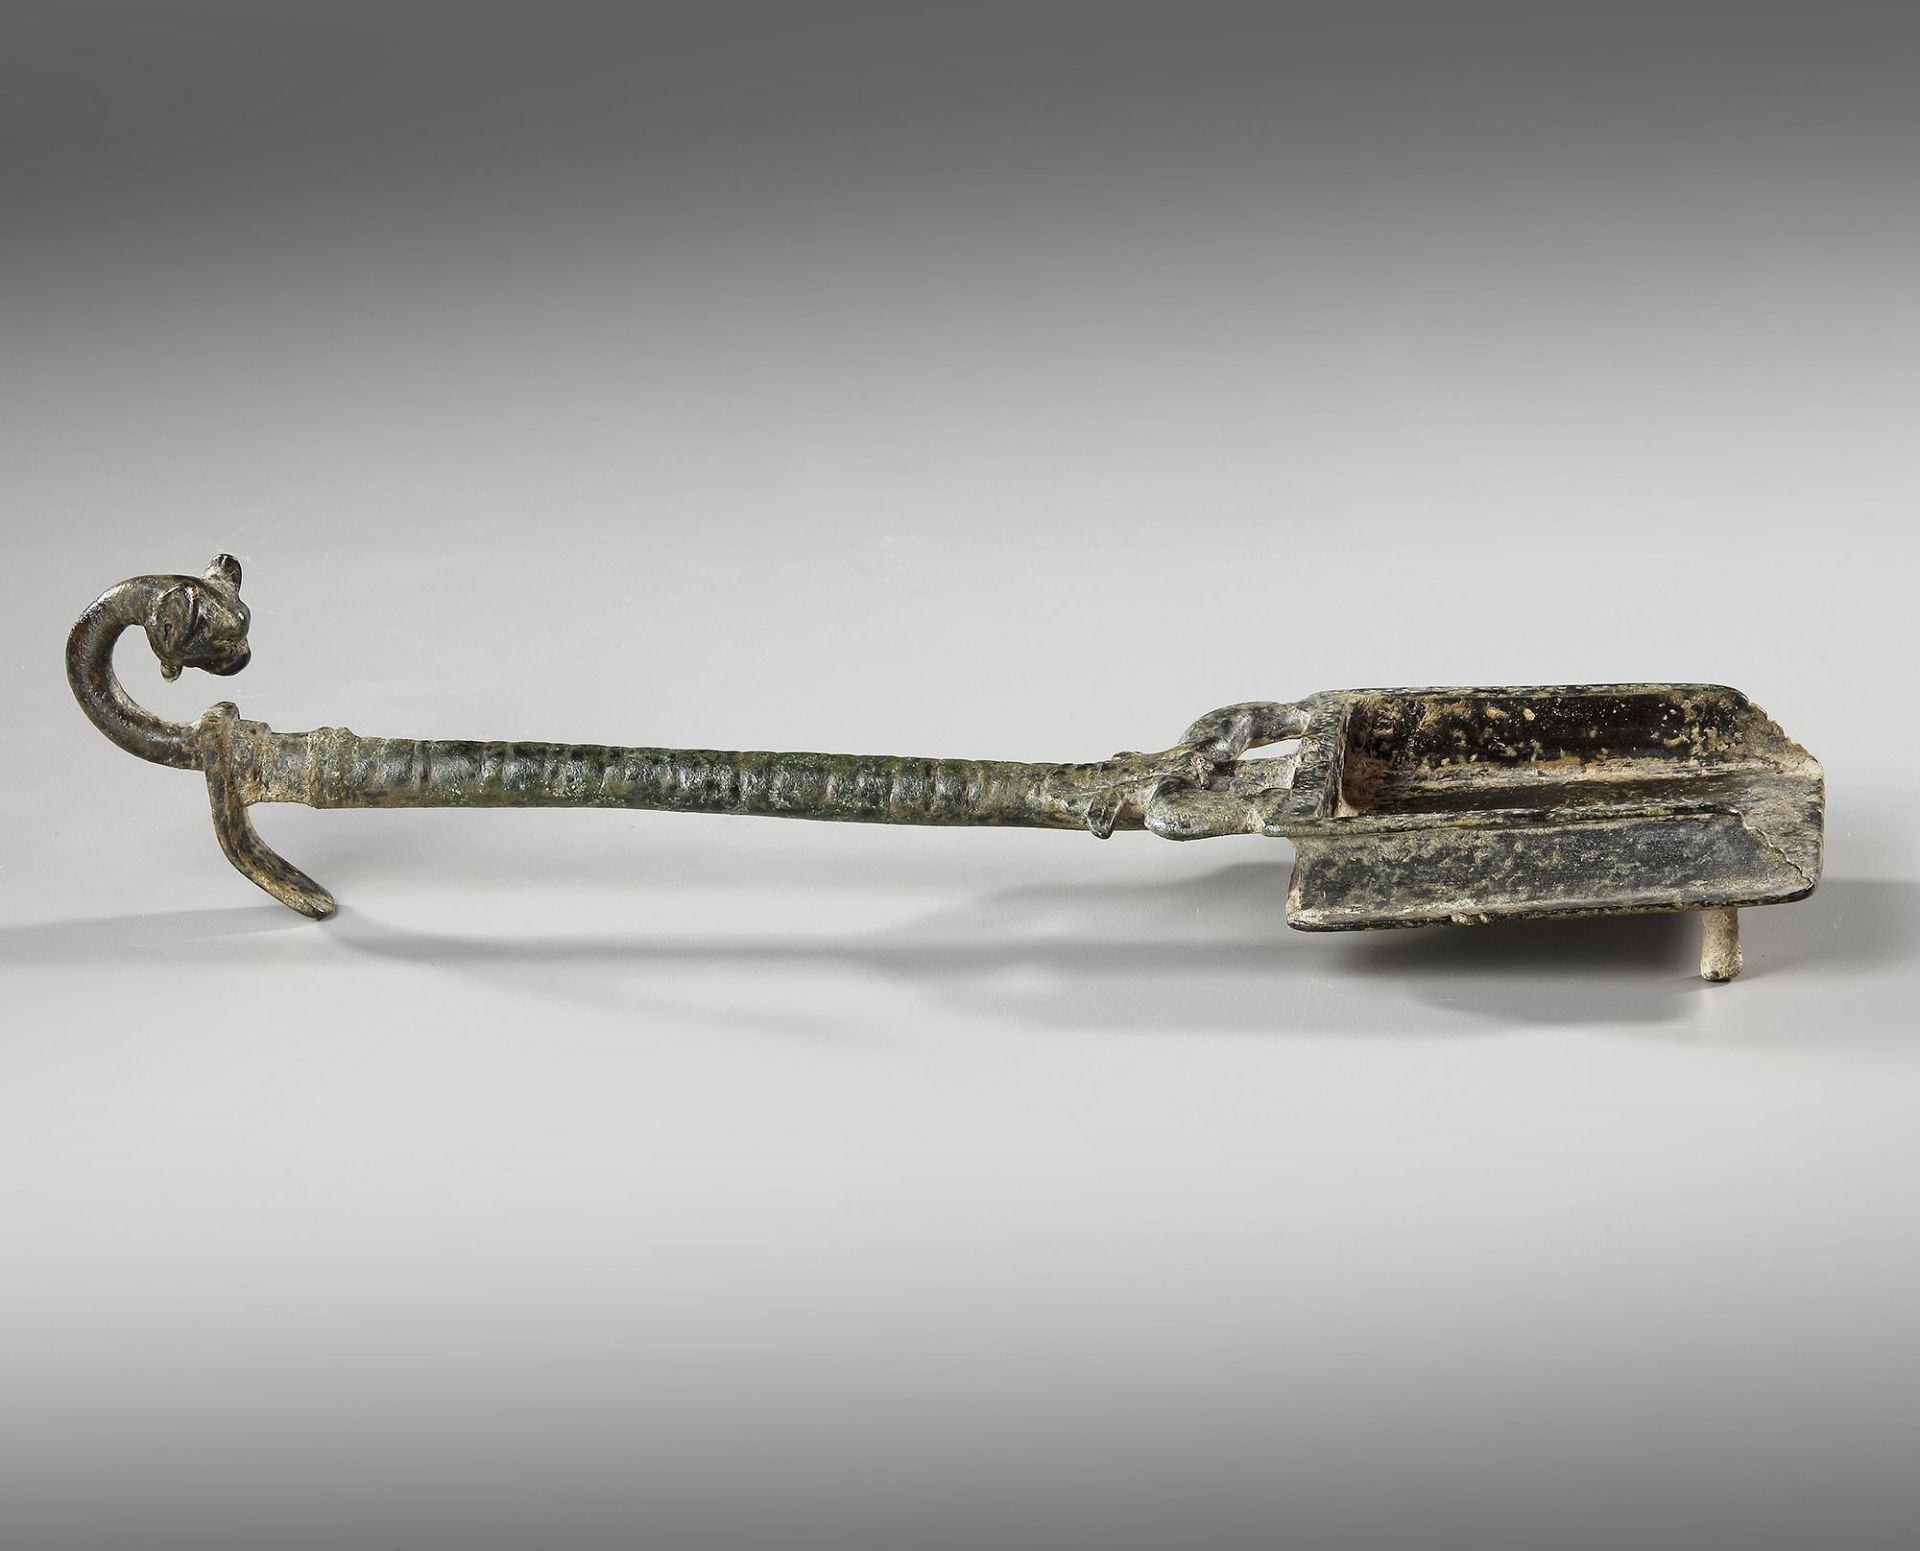 A ROMAN BRONZE INCENSE SHOVEL WITH A PANTHER HEAD, CIRCA 1ST-2ND. A.D. - Image 2 of 3